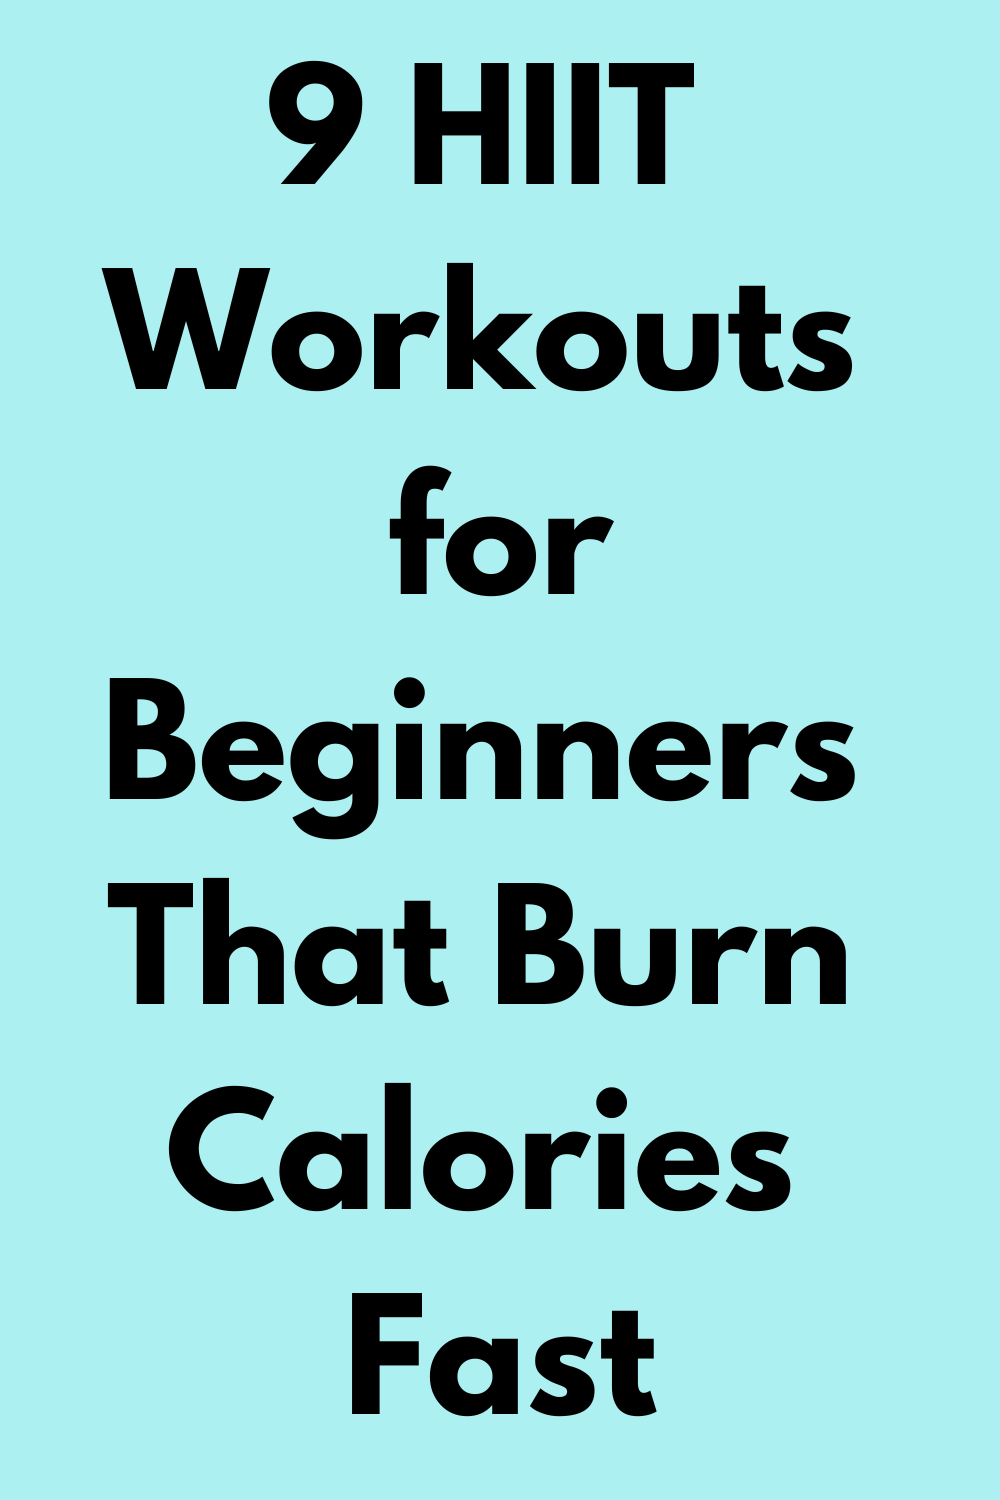 9 HIIT Workouts for Beginners That Burn Calories Fast